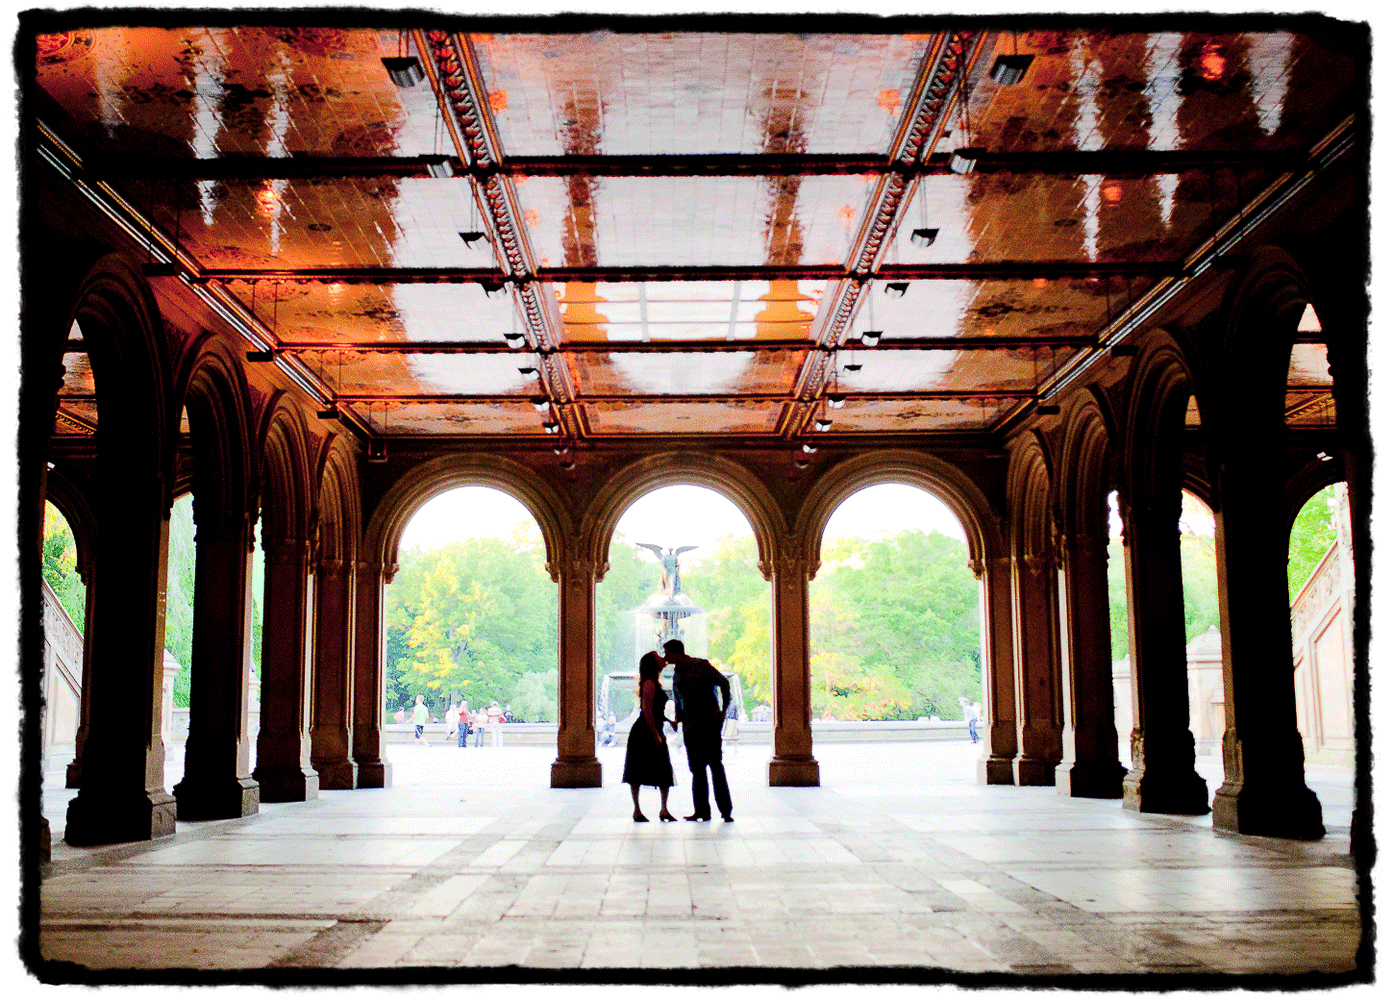 Engagement Portrait: Amy & Jon share a kiss by Bethesda Fountain in New York's Central Park.